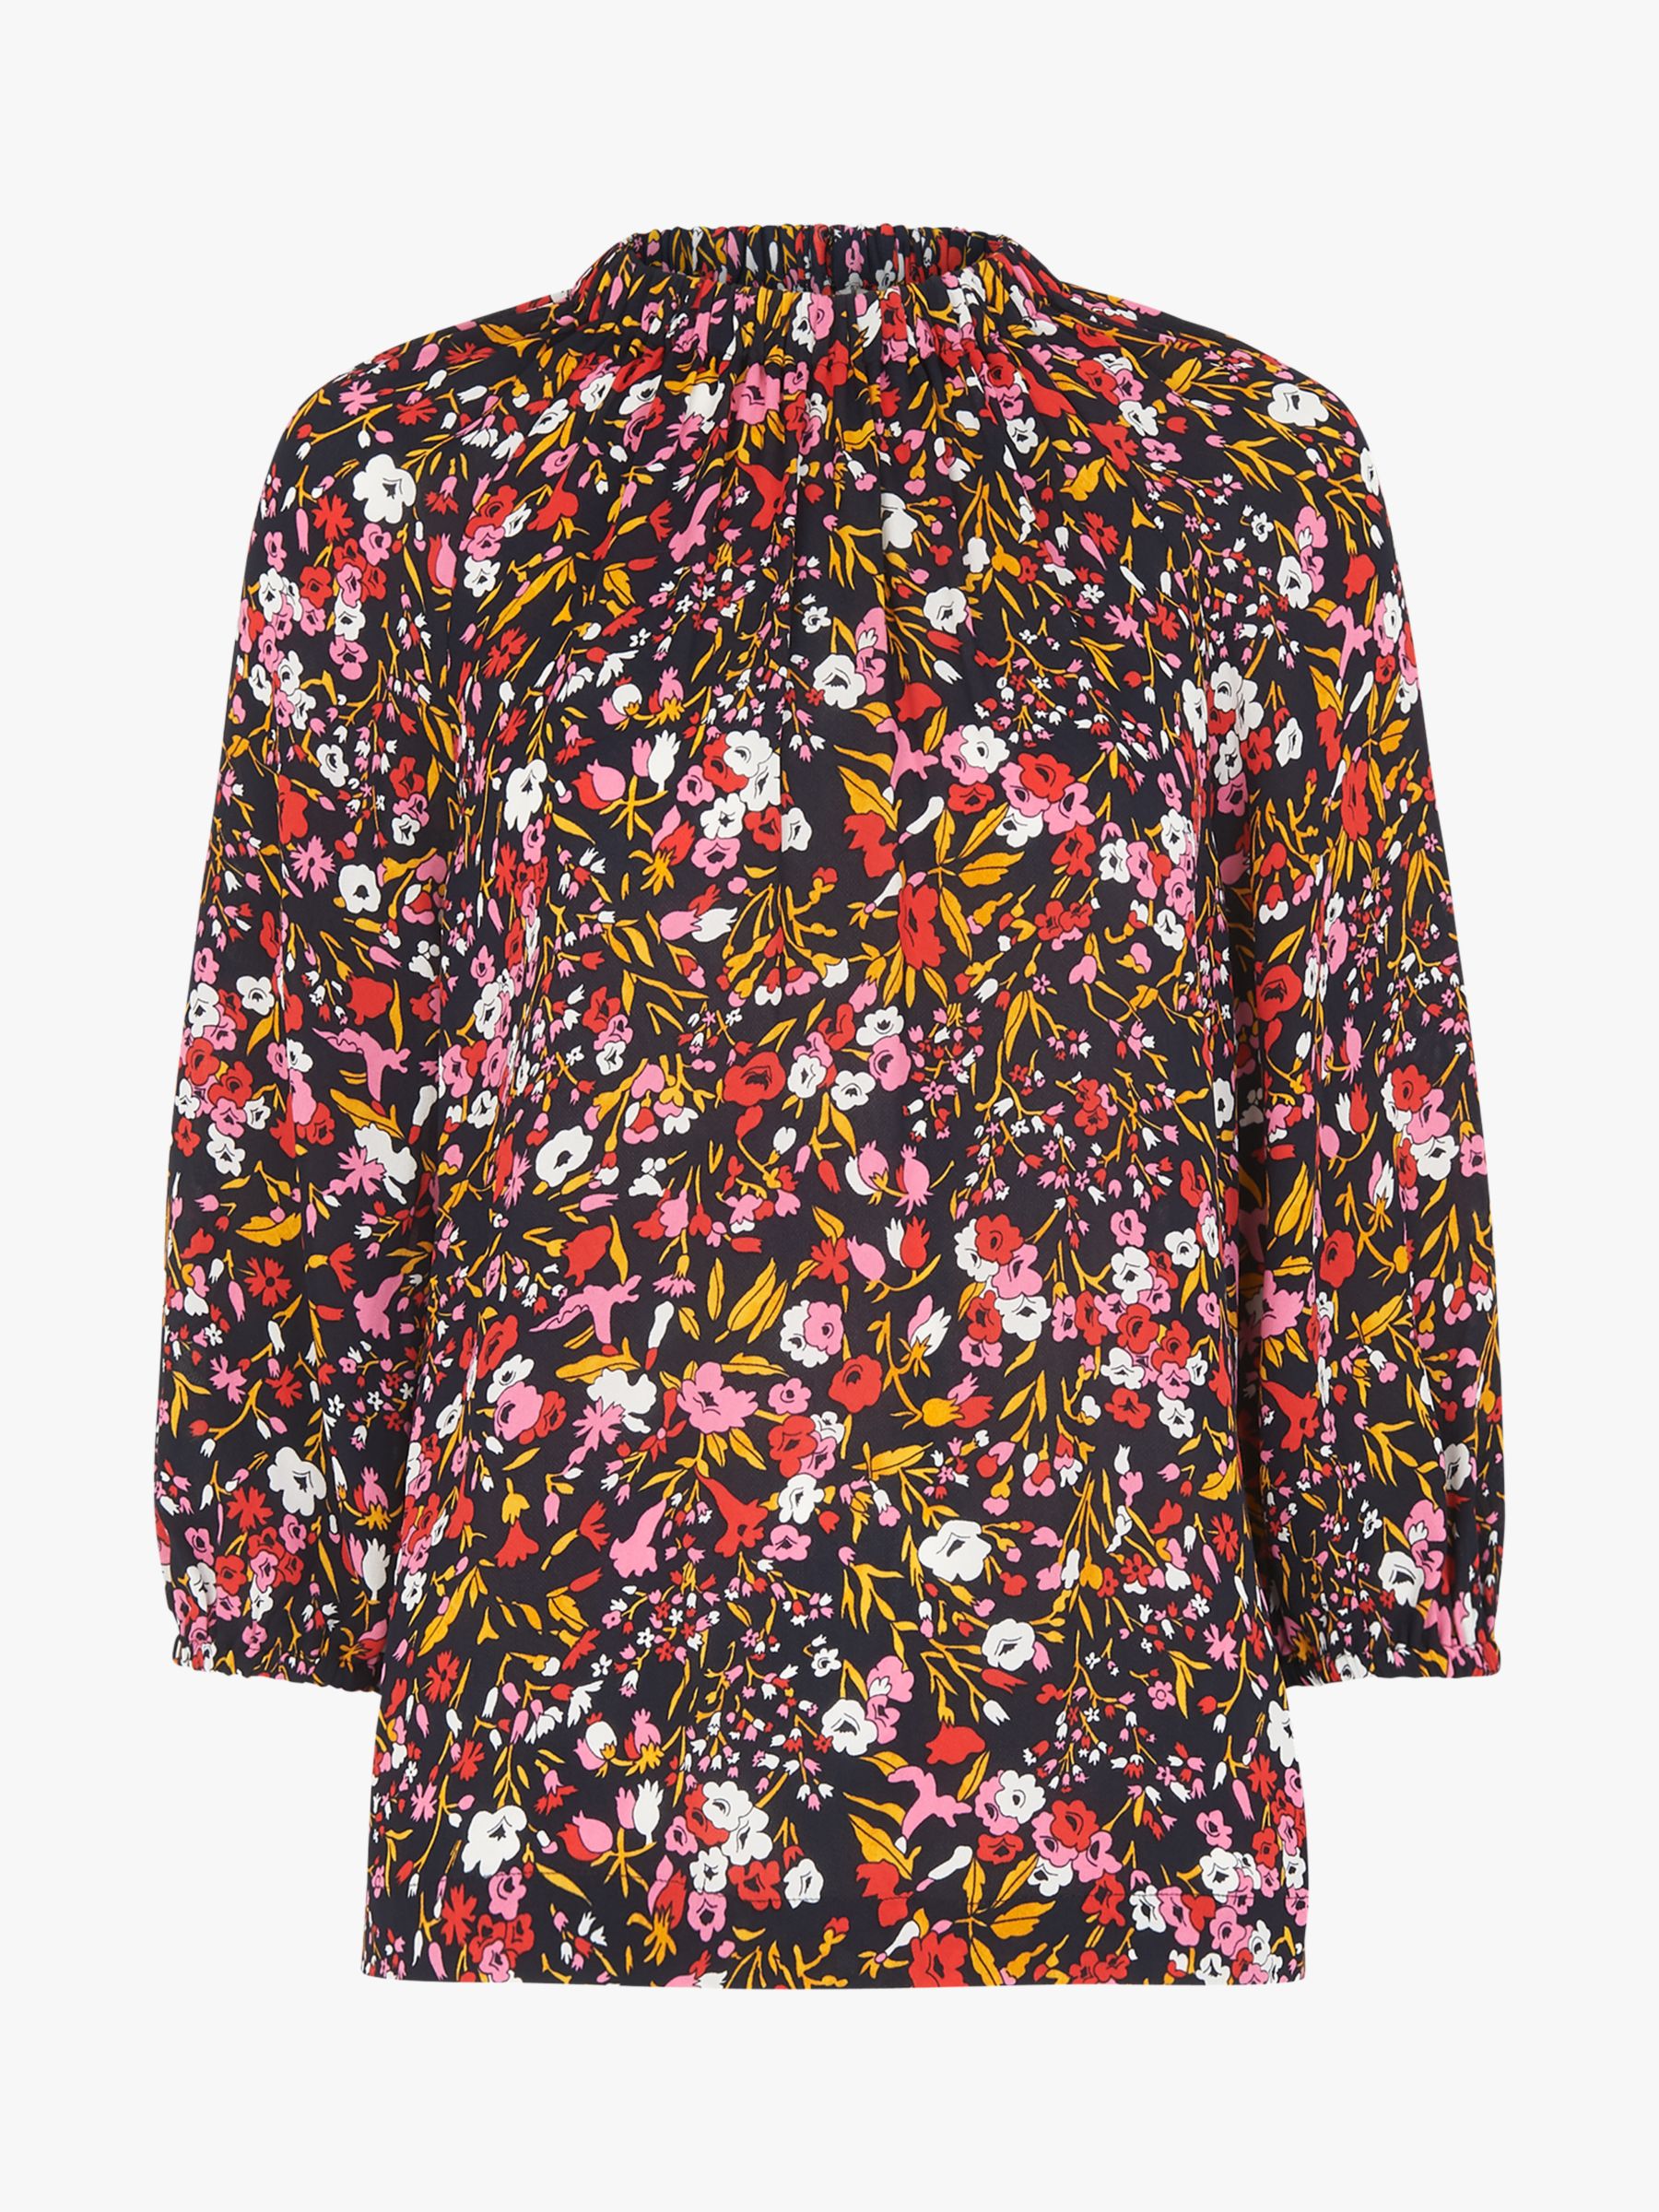 Whistles Floral Meadow Blouse, Pink Multi at John Lewis & Partners